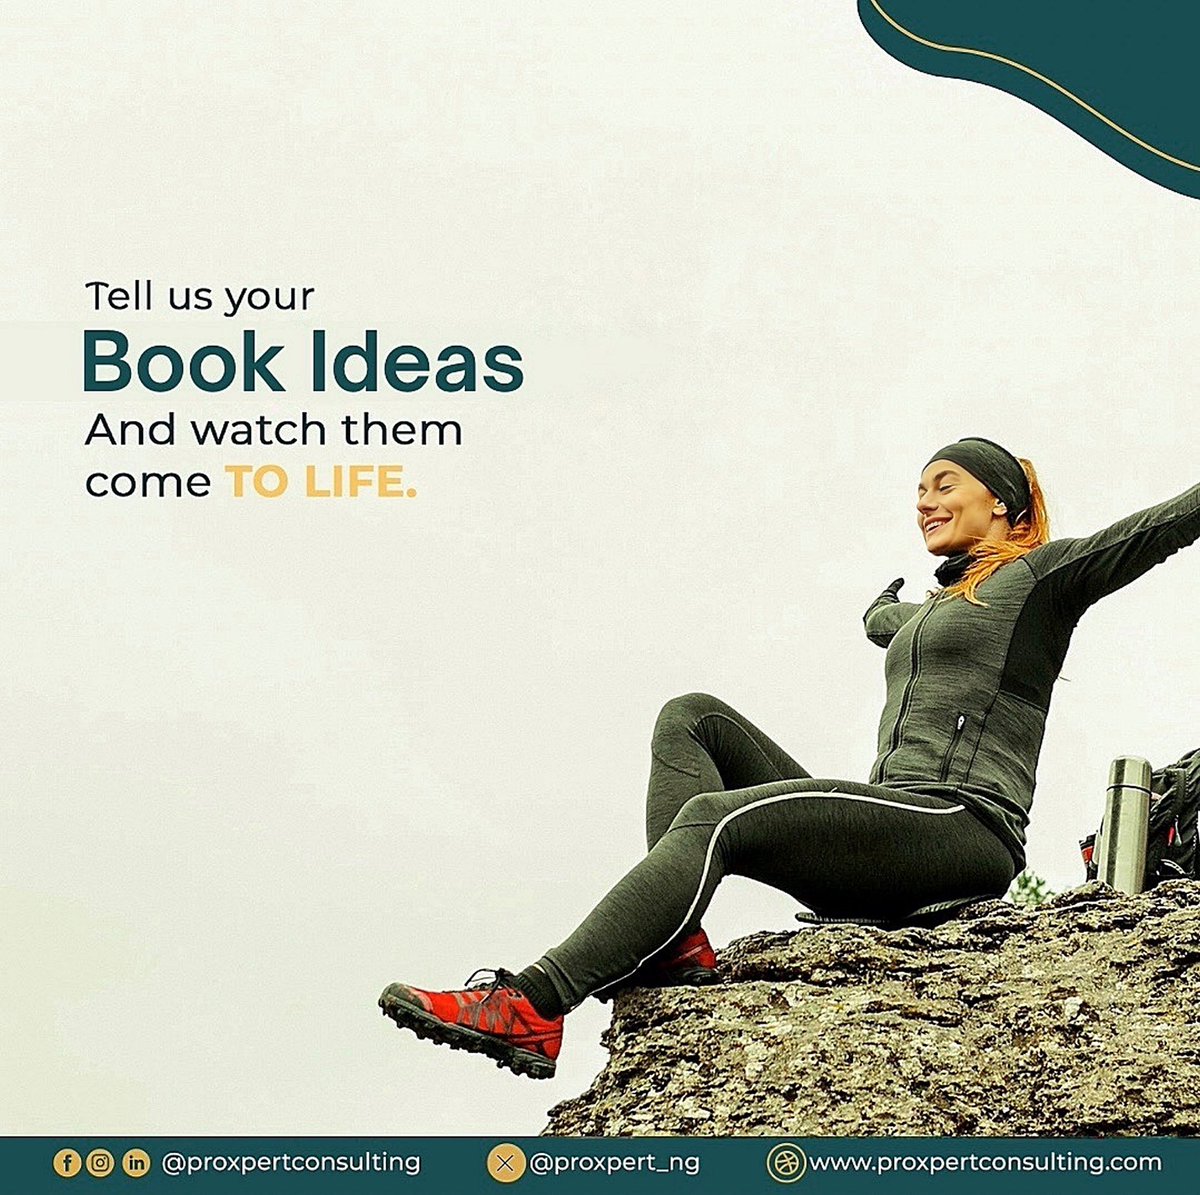 Tell us your book ideas and watch them come to life.

#proxpertconsulting #proxpert #contentmanagement #everythingwriting #bookpublishing #contentwriting #digitalproducts #coachingandaccountability #professionalism #expertise #editing #proofreading #books #reading #ghostwriting